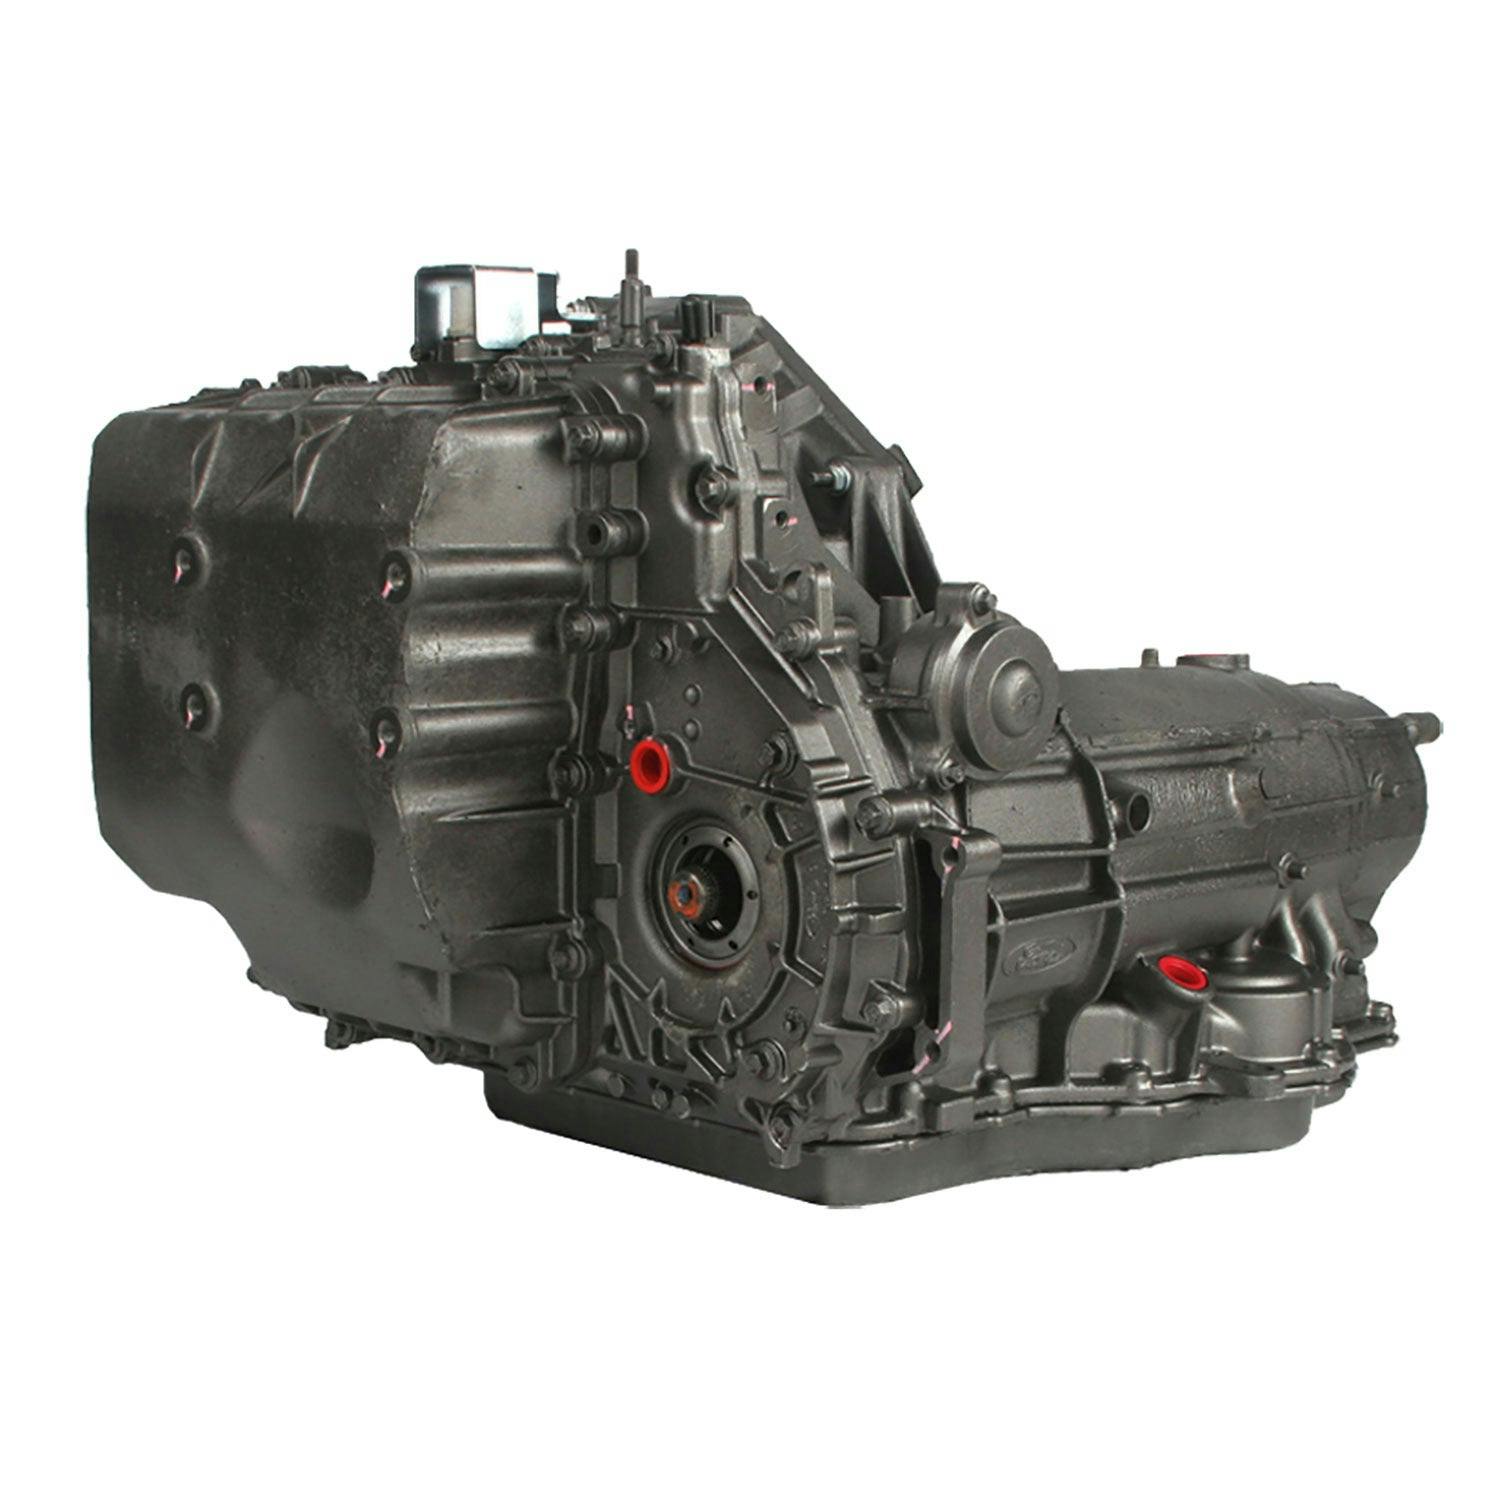 Automatic Transmission for 1998 Lincoln Continental FWD with 4.6L V8 Engine